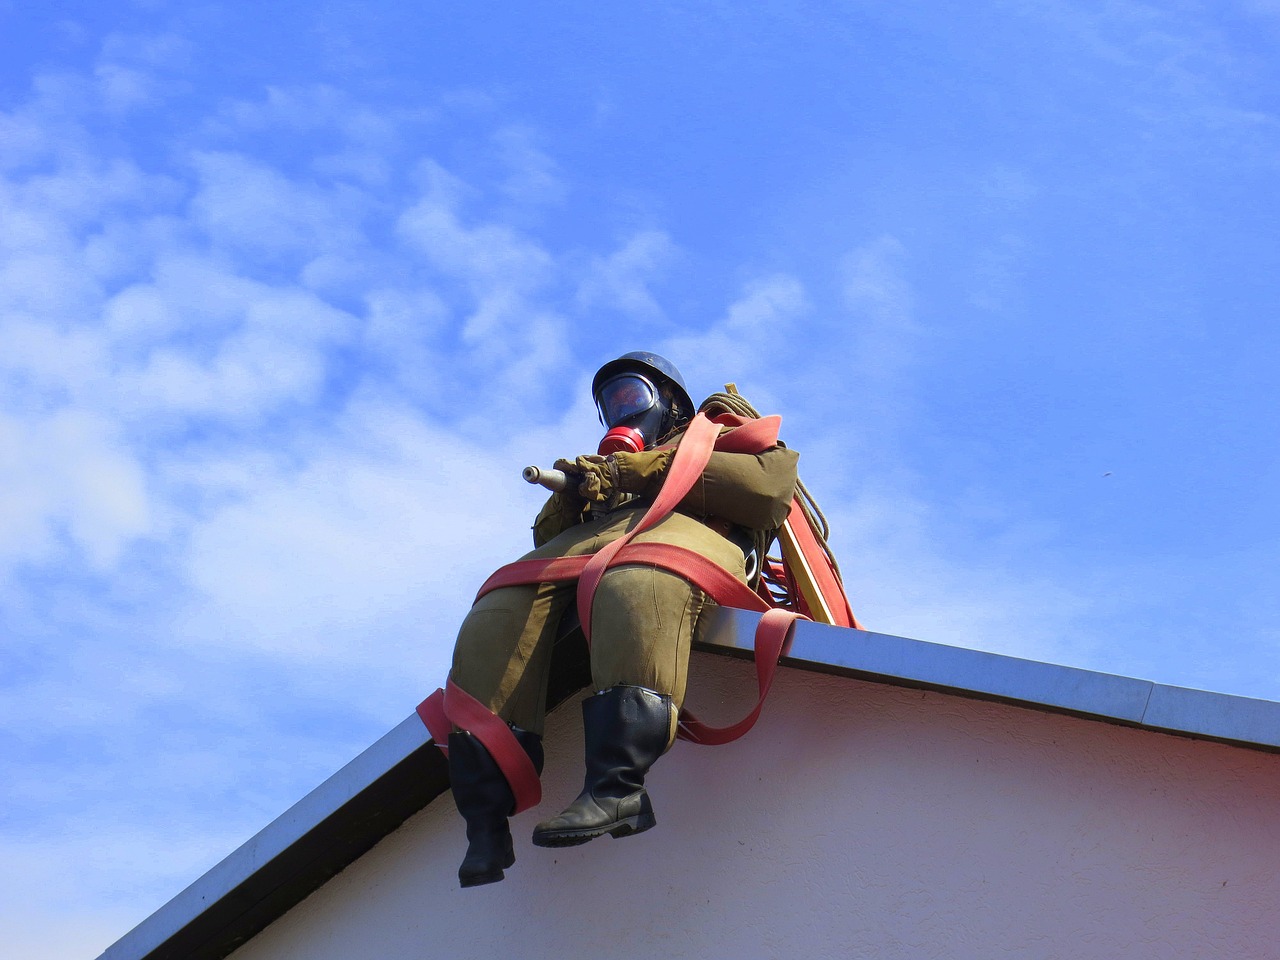 Fire fighter,roof figure,fire,free pictures, free photos - free image ...